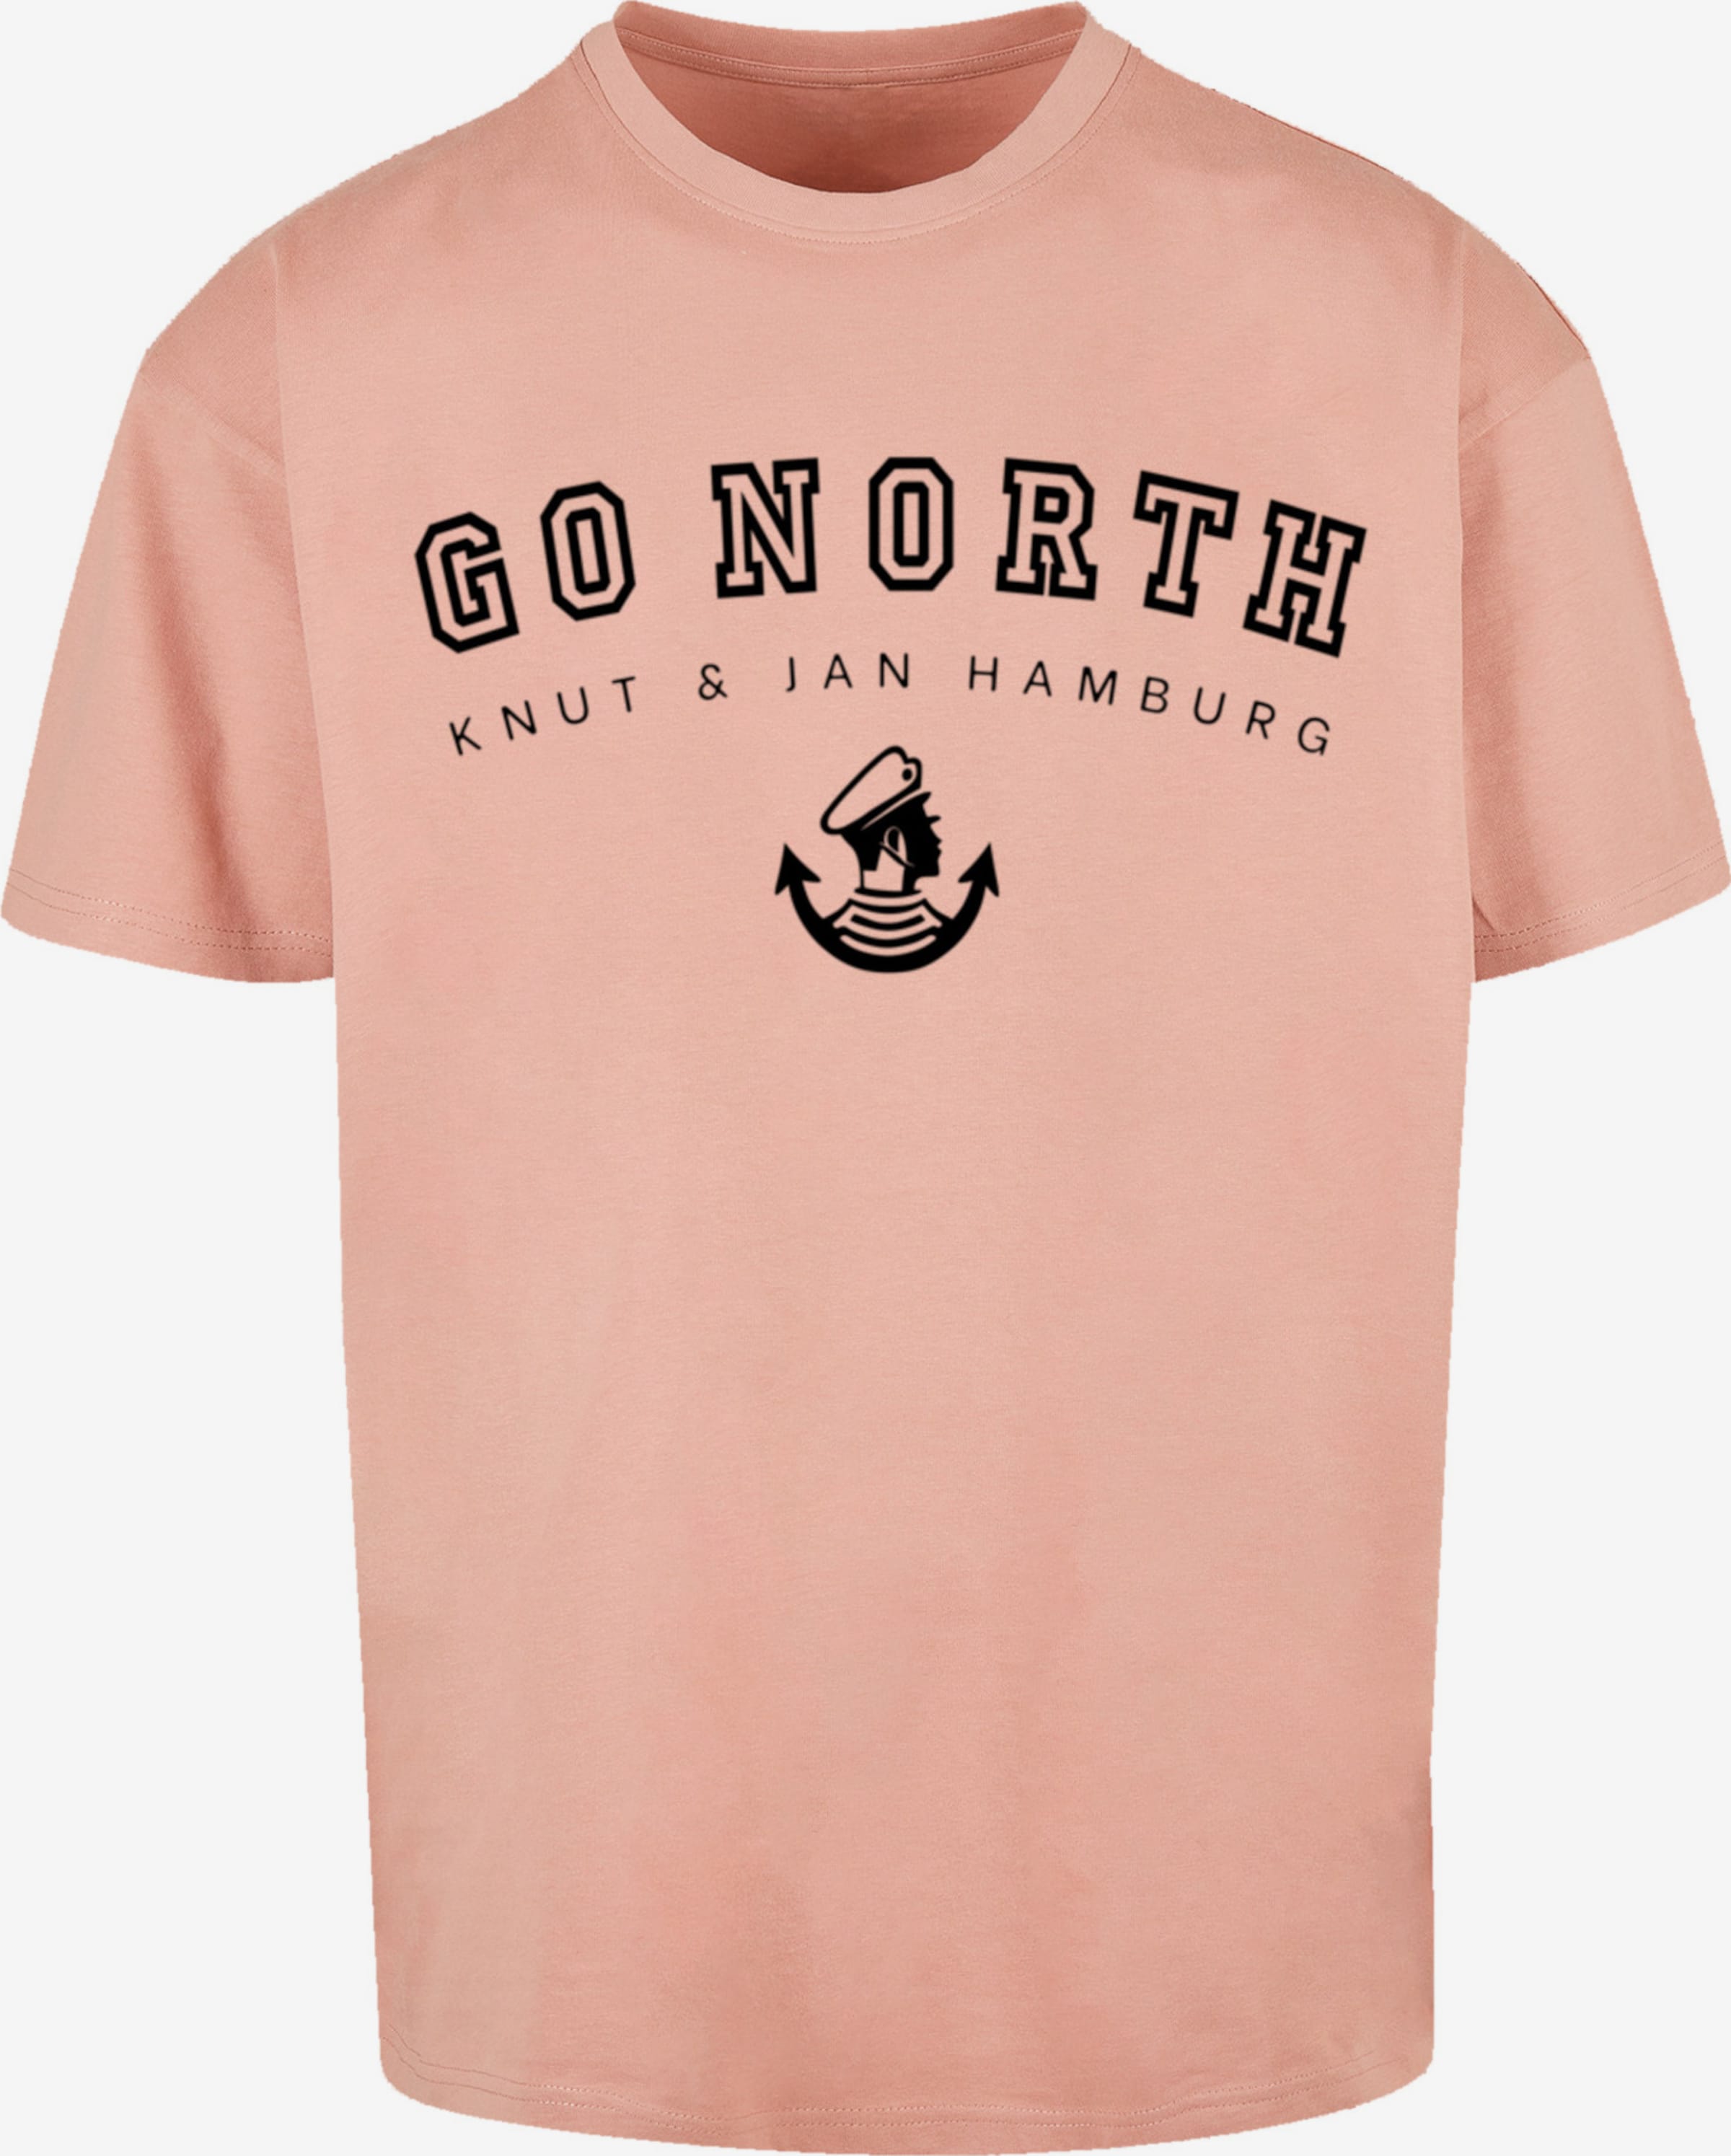 ABOUT Shirt in F4NT4STIC | North Pastellpink Hamburg\' \'Go Knut & YOU Jan